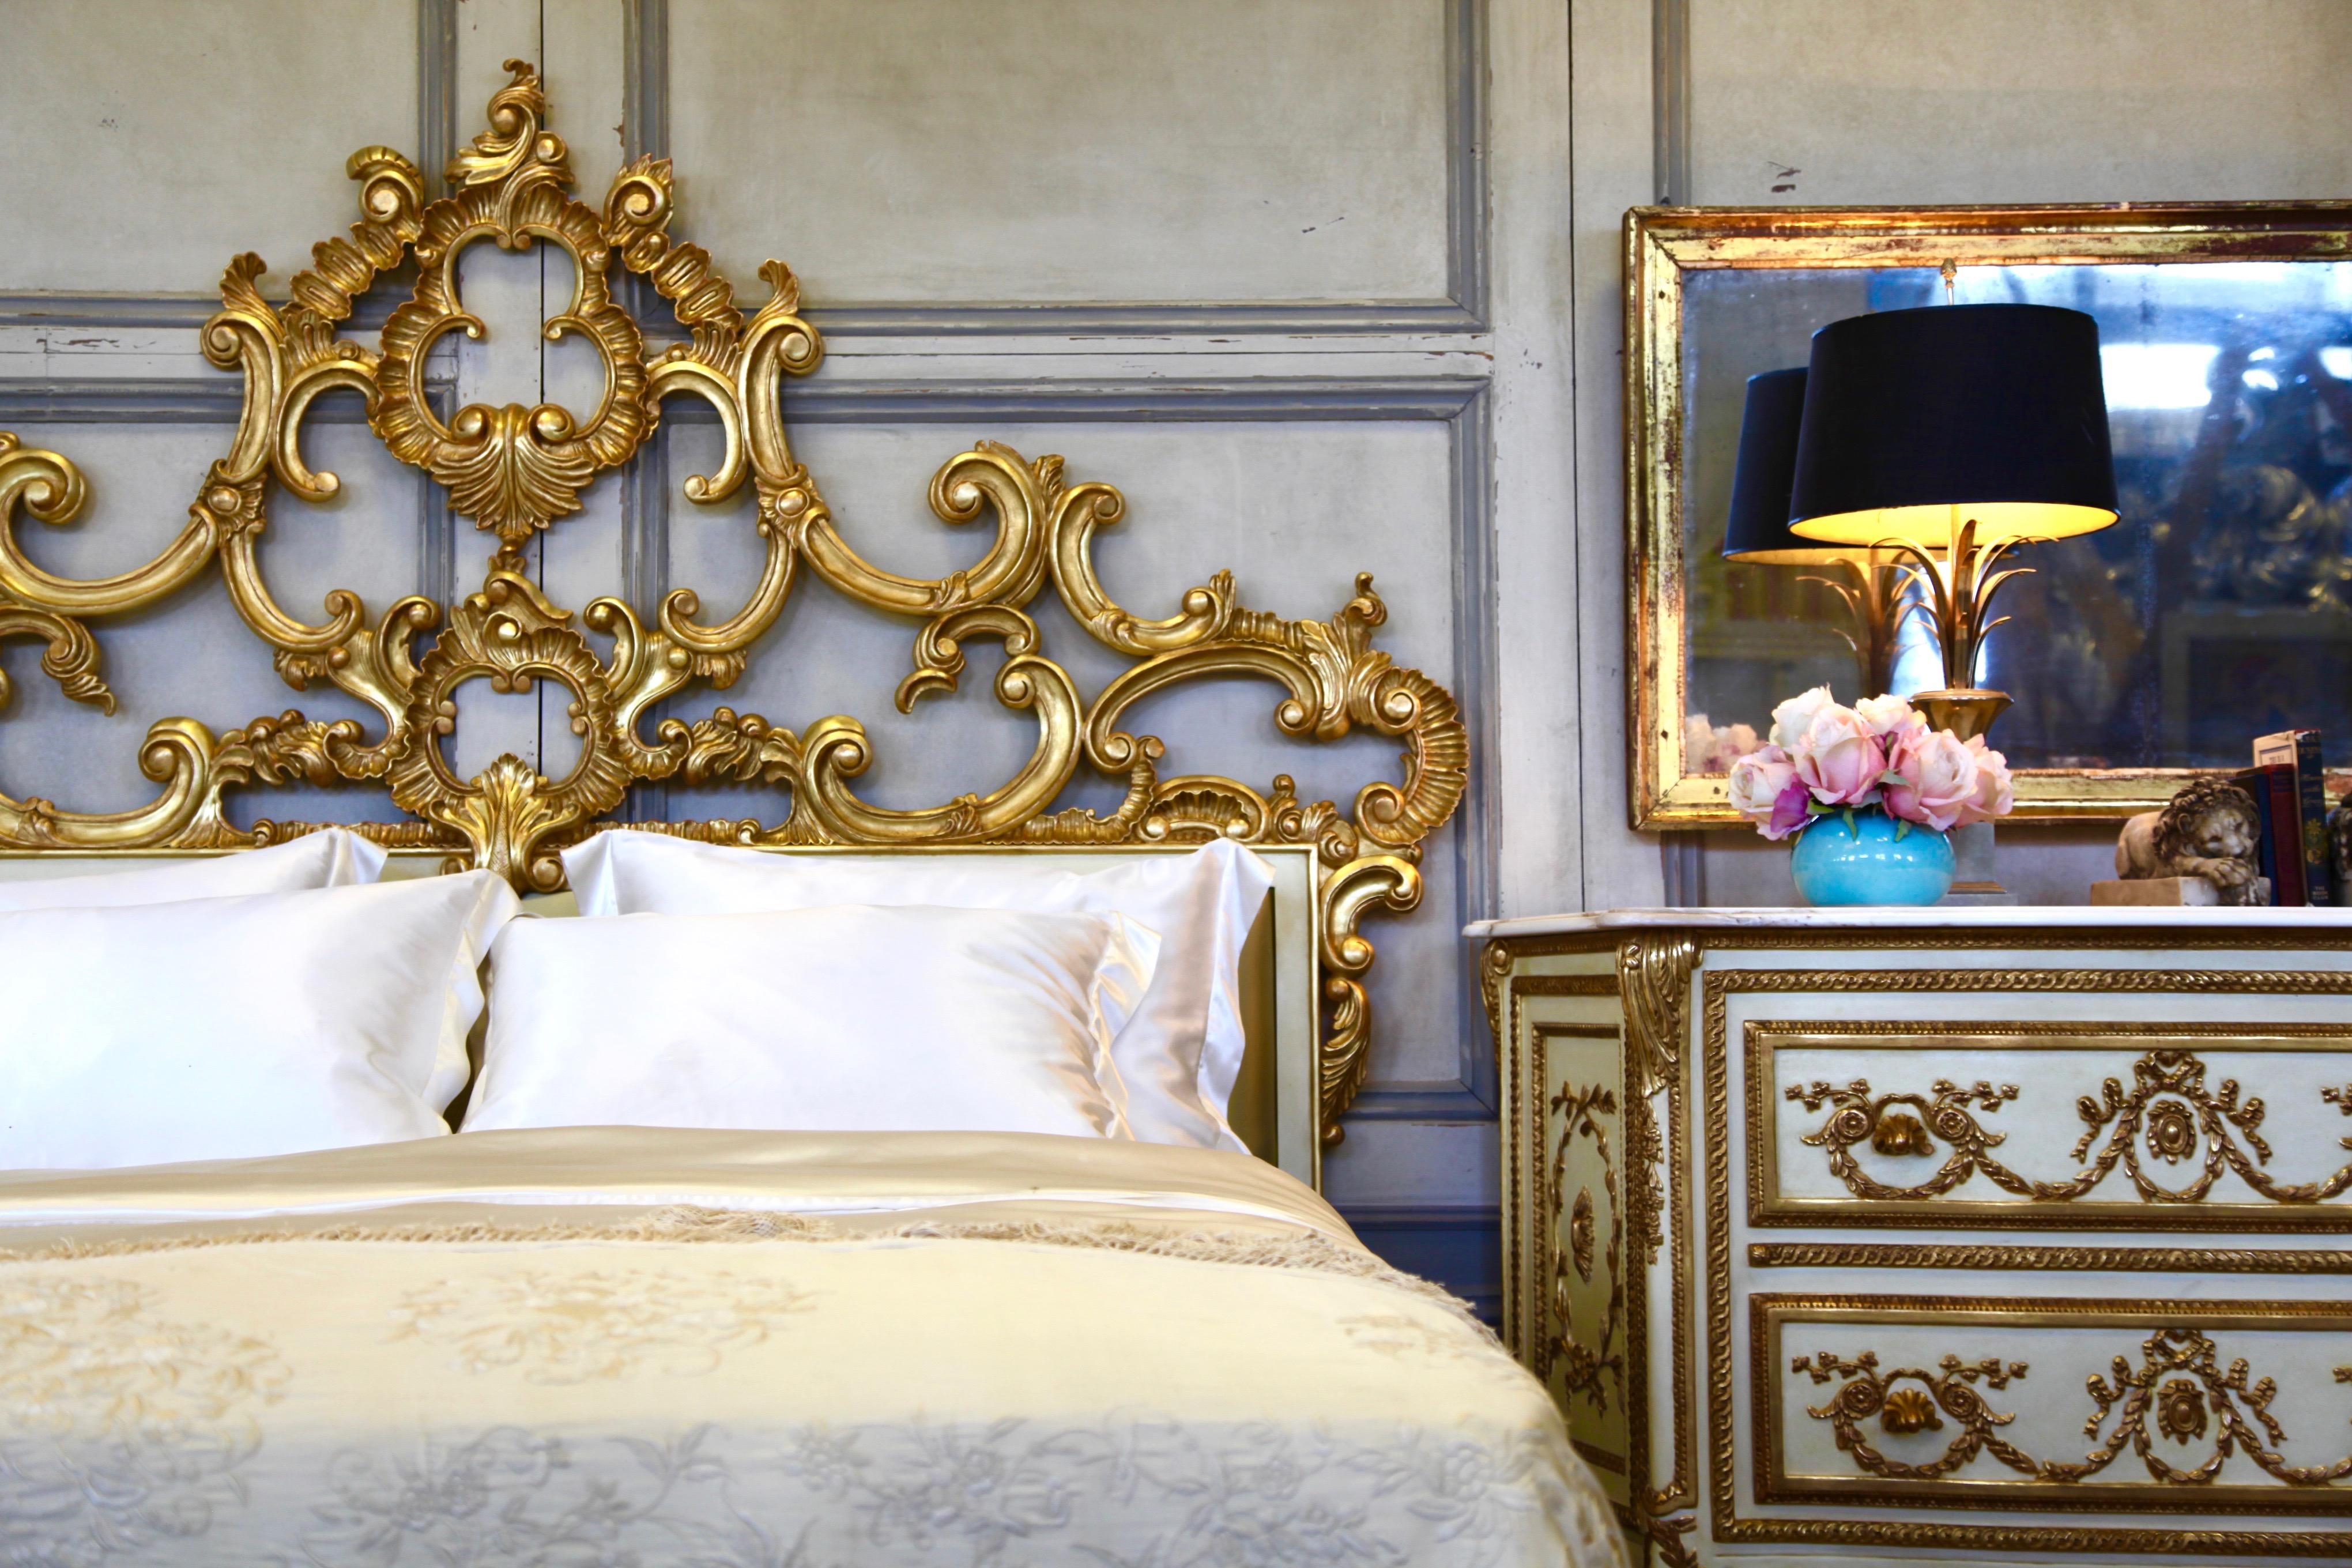 The Venetian bed is is an elegant example of fine filigree work from the Signature Range of La Maison London. The design creates a rhapsody of 'S' curves, scroll work, stylised acanthus leaves and shell motifs which all come together to make a